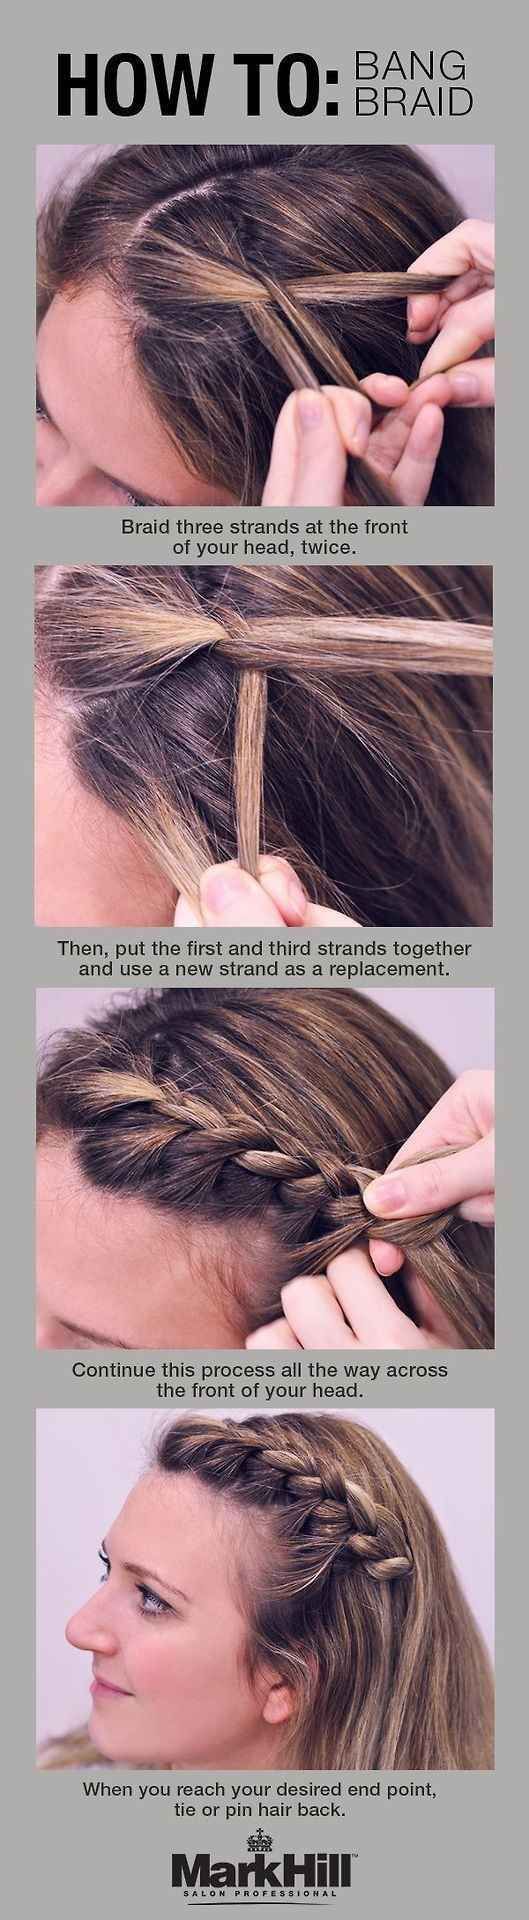 10-Awesome-Lists-for-Hair-Care-Tips.jpg